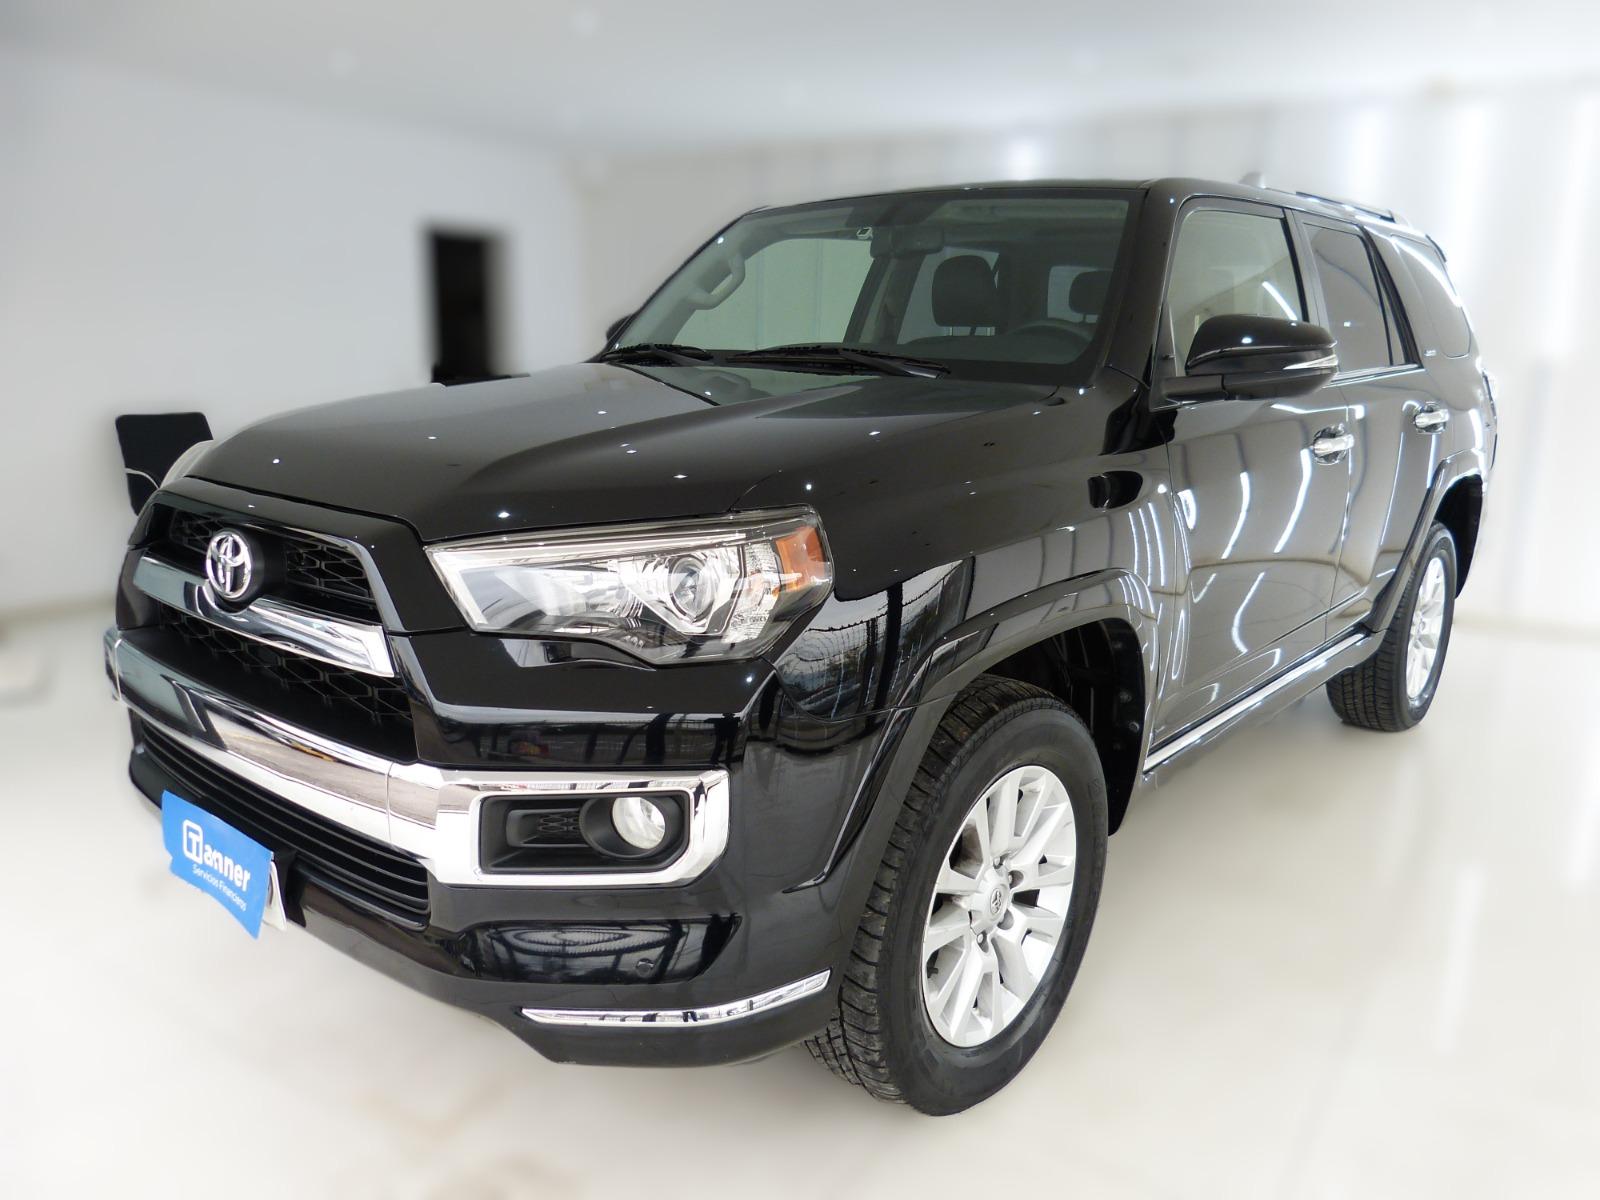 TOYOTA 4 RUNNER LIMITED 4X2 2016 MAXIMO EQUIPO - FULL MOTOR